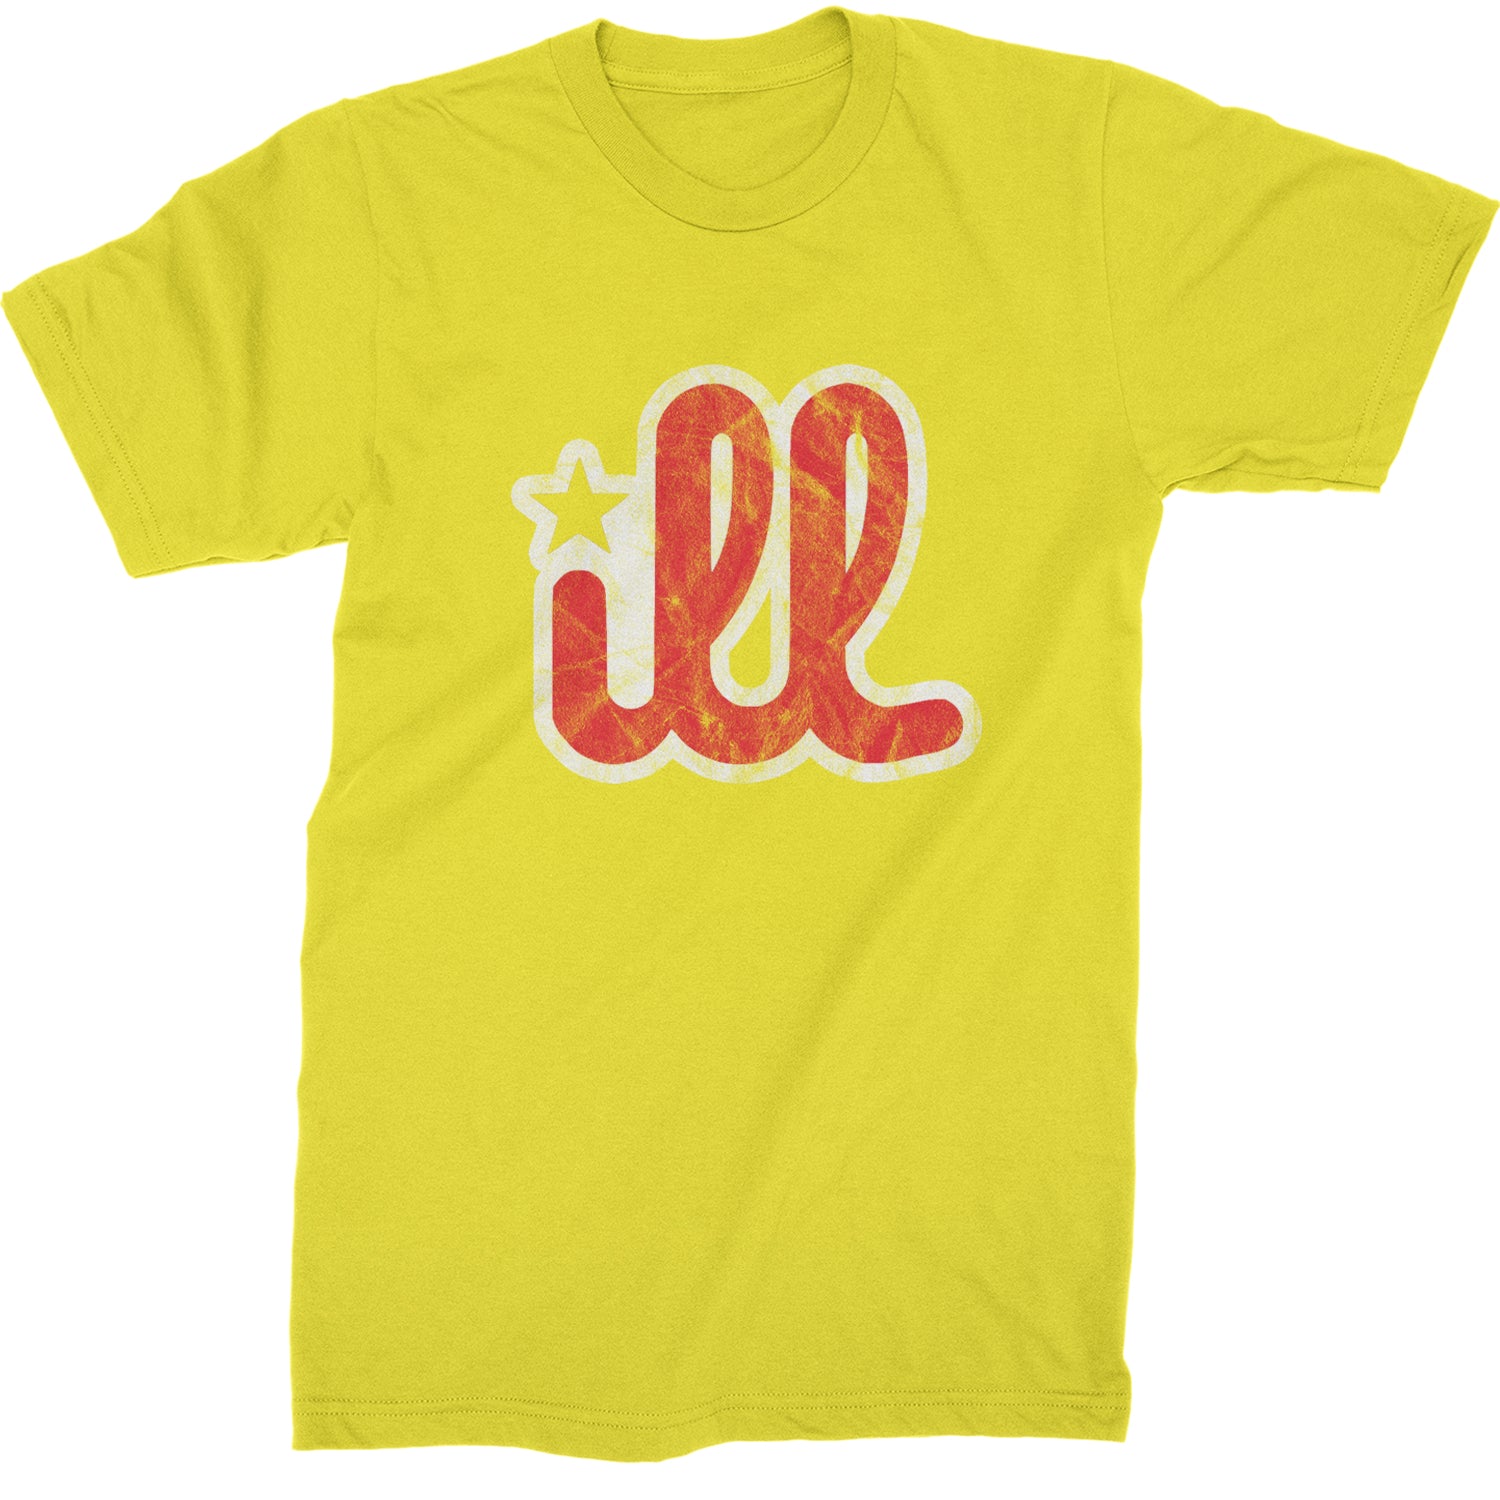 ILL Vintage It's A Philadelphia Philly Thing Mens T-shirt Yellow